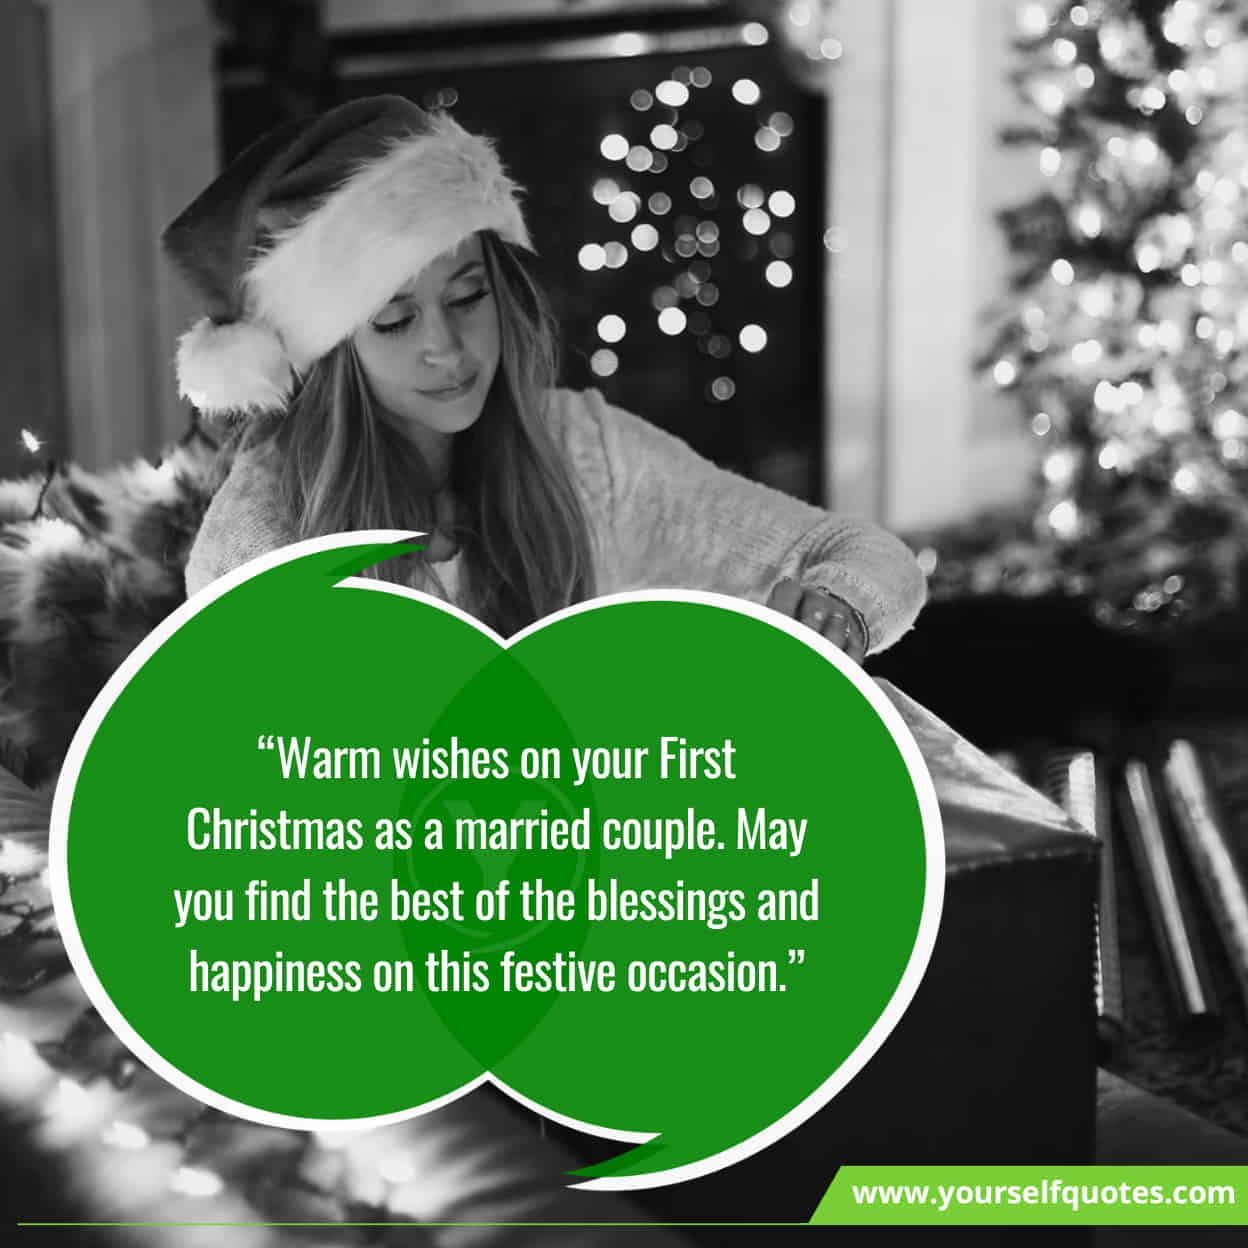 88 Merry Christmas Quotes 2022 For Family, Friends